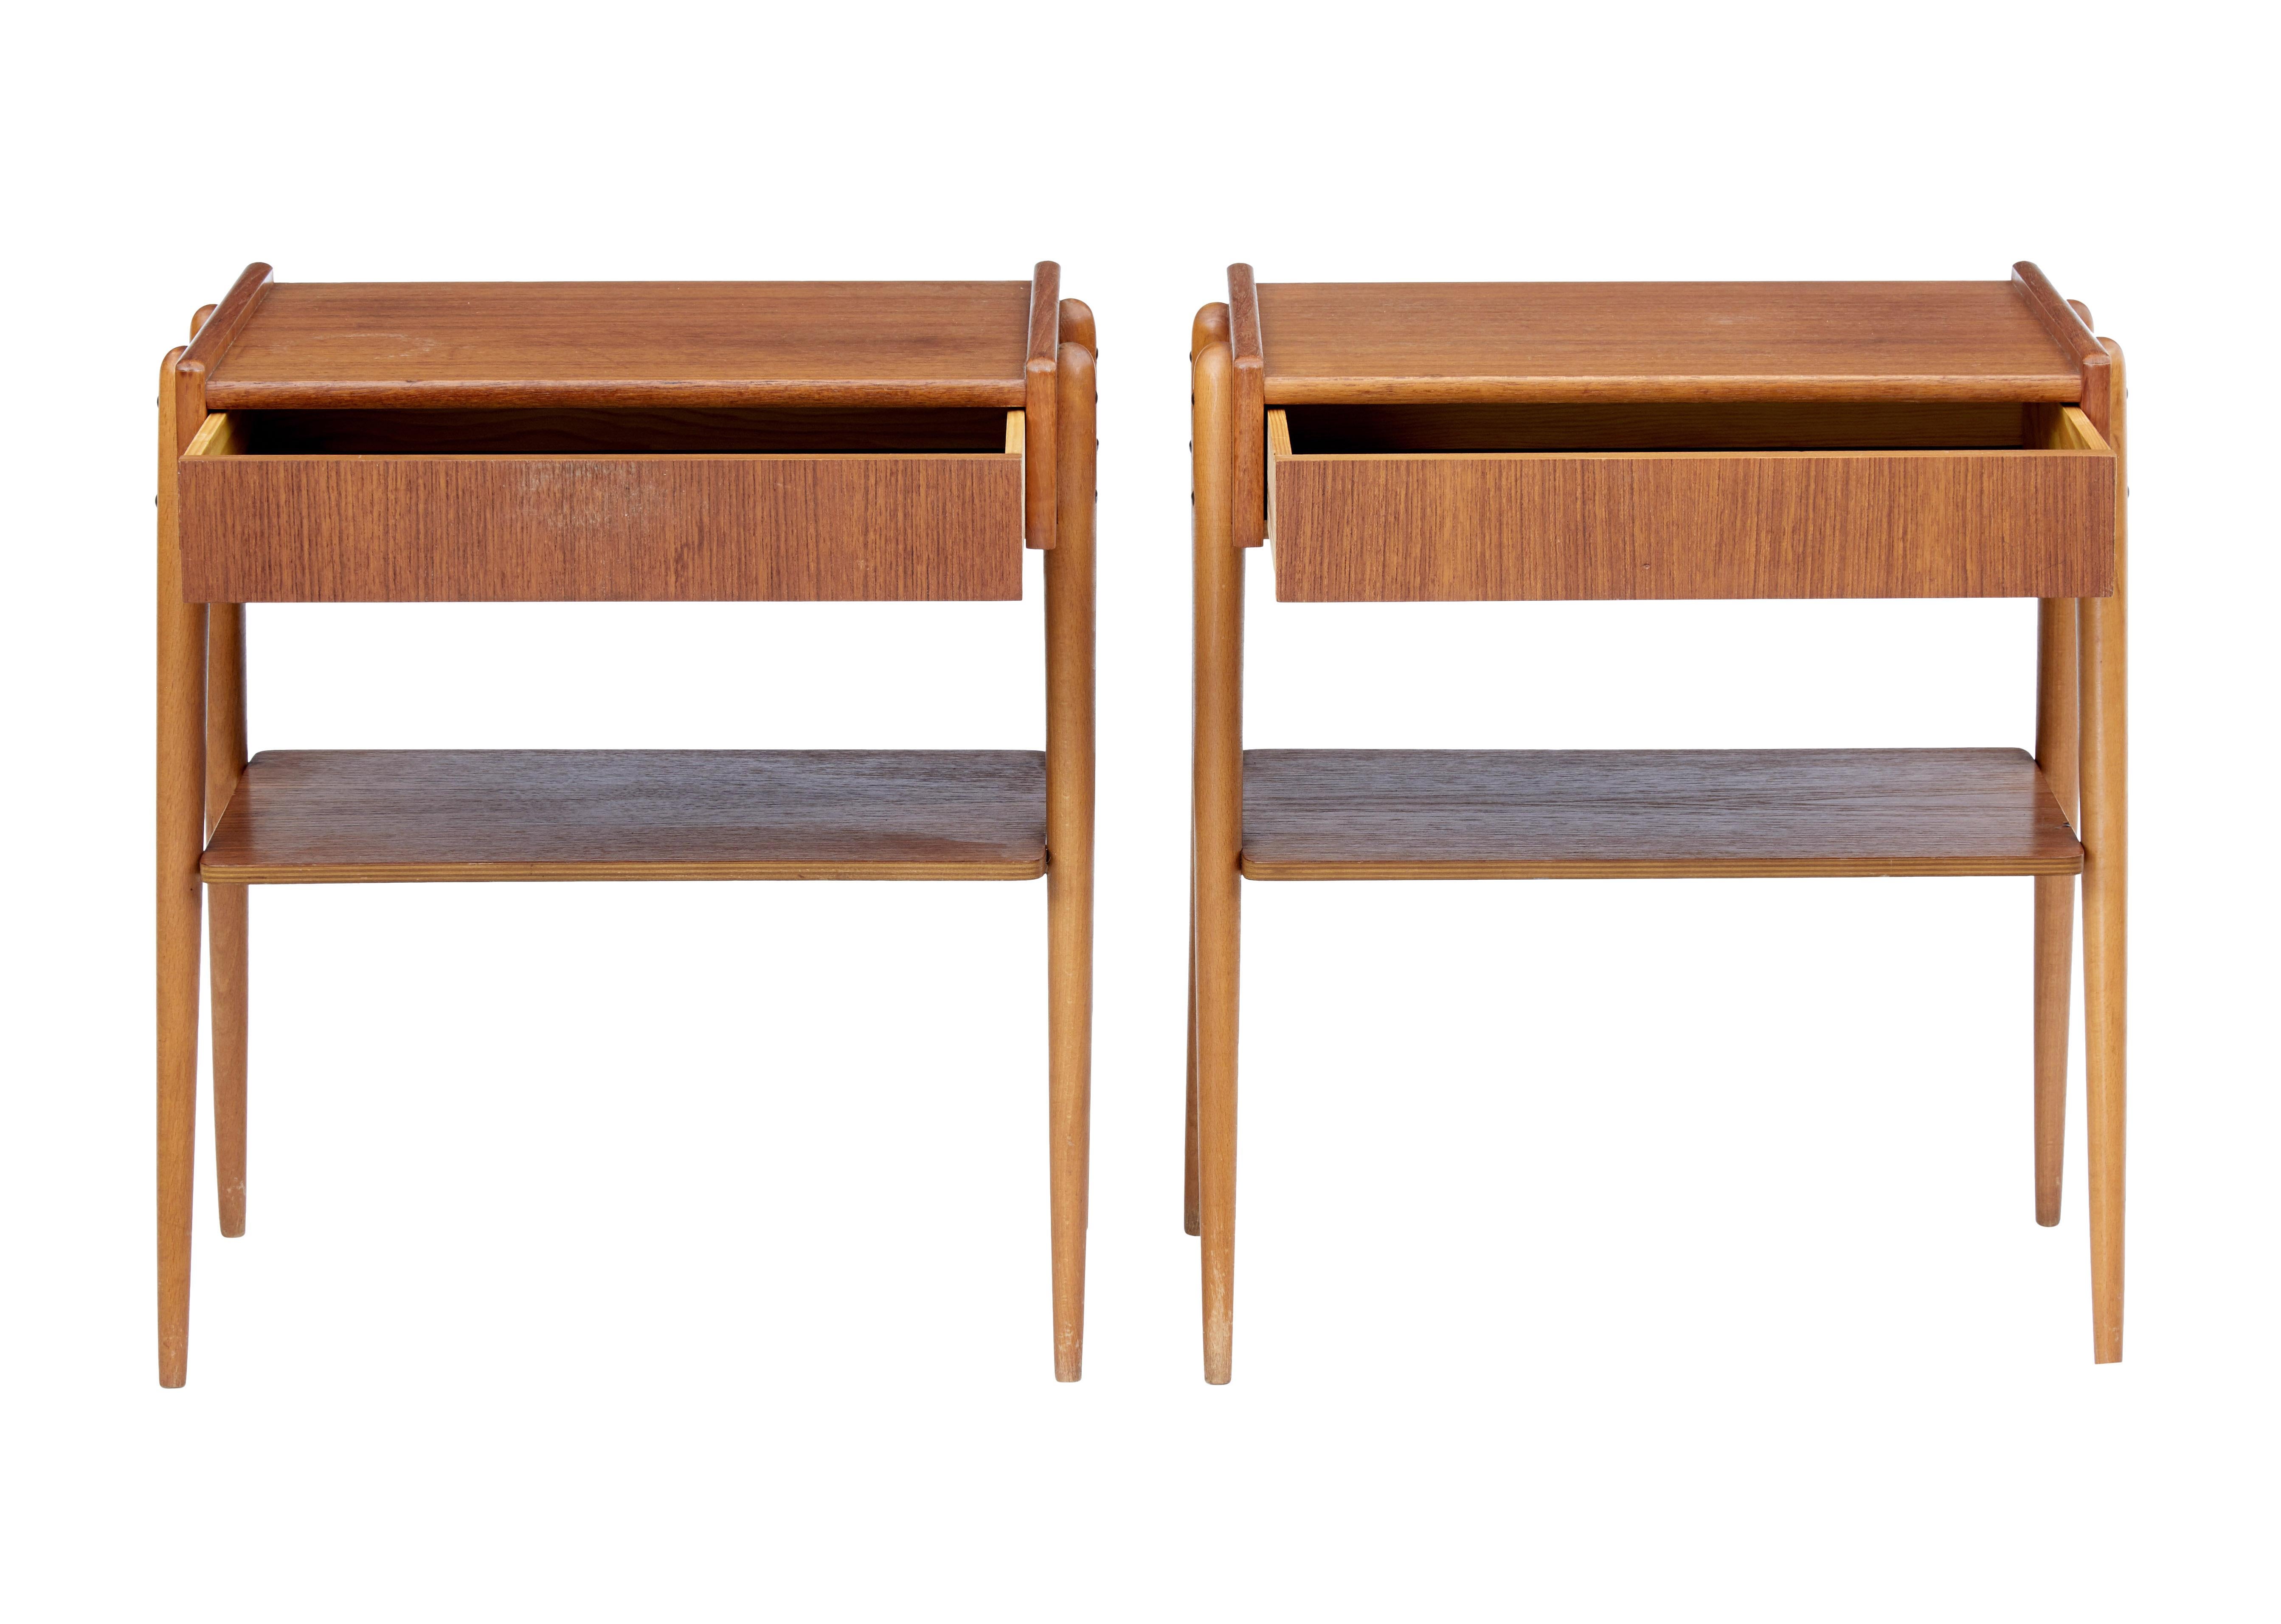 Pair of teak bedside tables by AB Carlstron and Co Mobelfabrik AB, circa 1960.

Elegant piece of Scandinavian design, with simple concealed drawer to the front. Teak frames which function as legs and to support the shelf.

These tables do